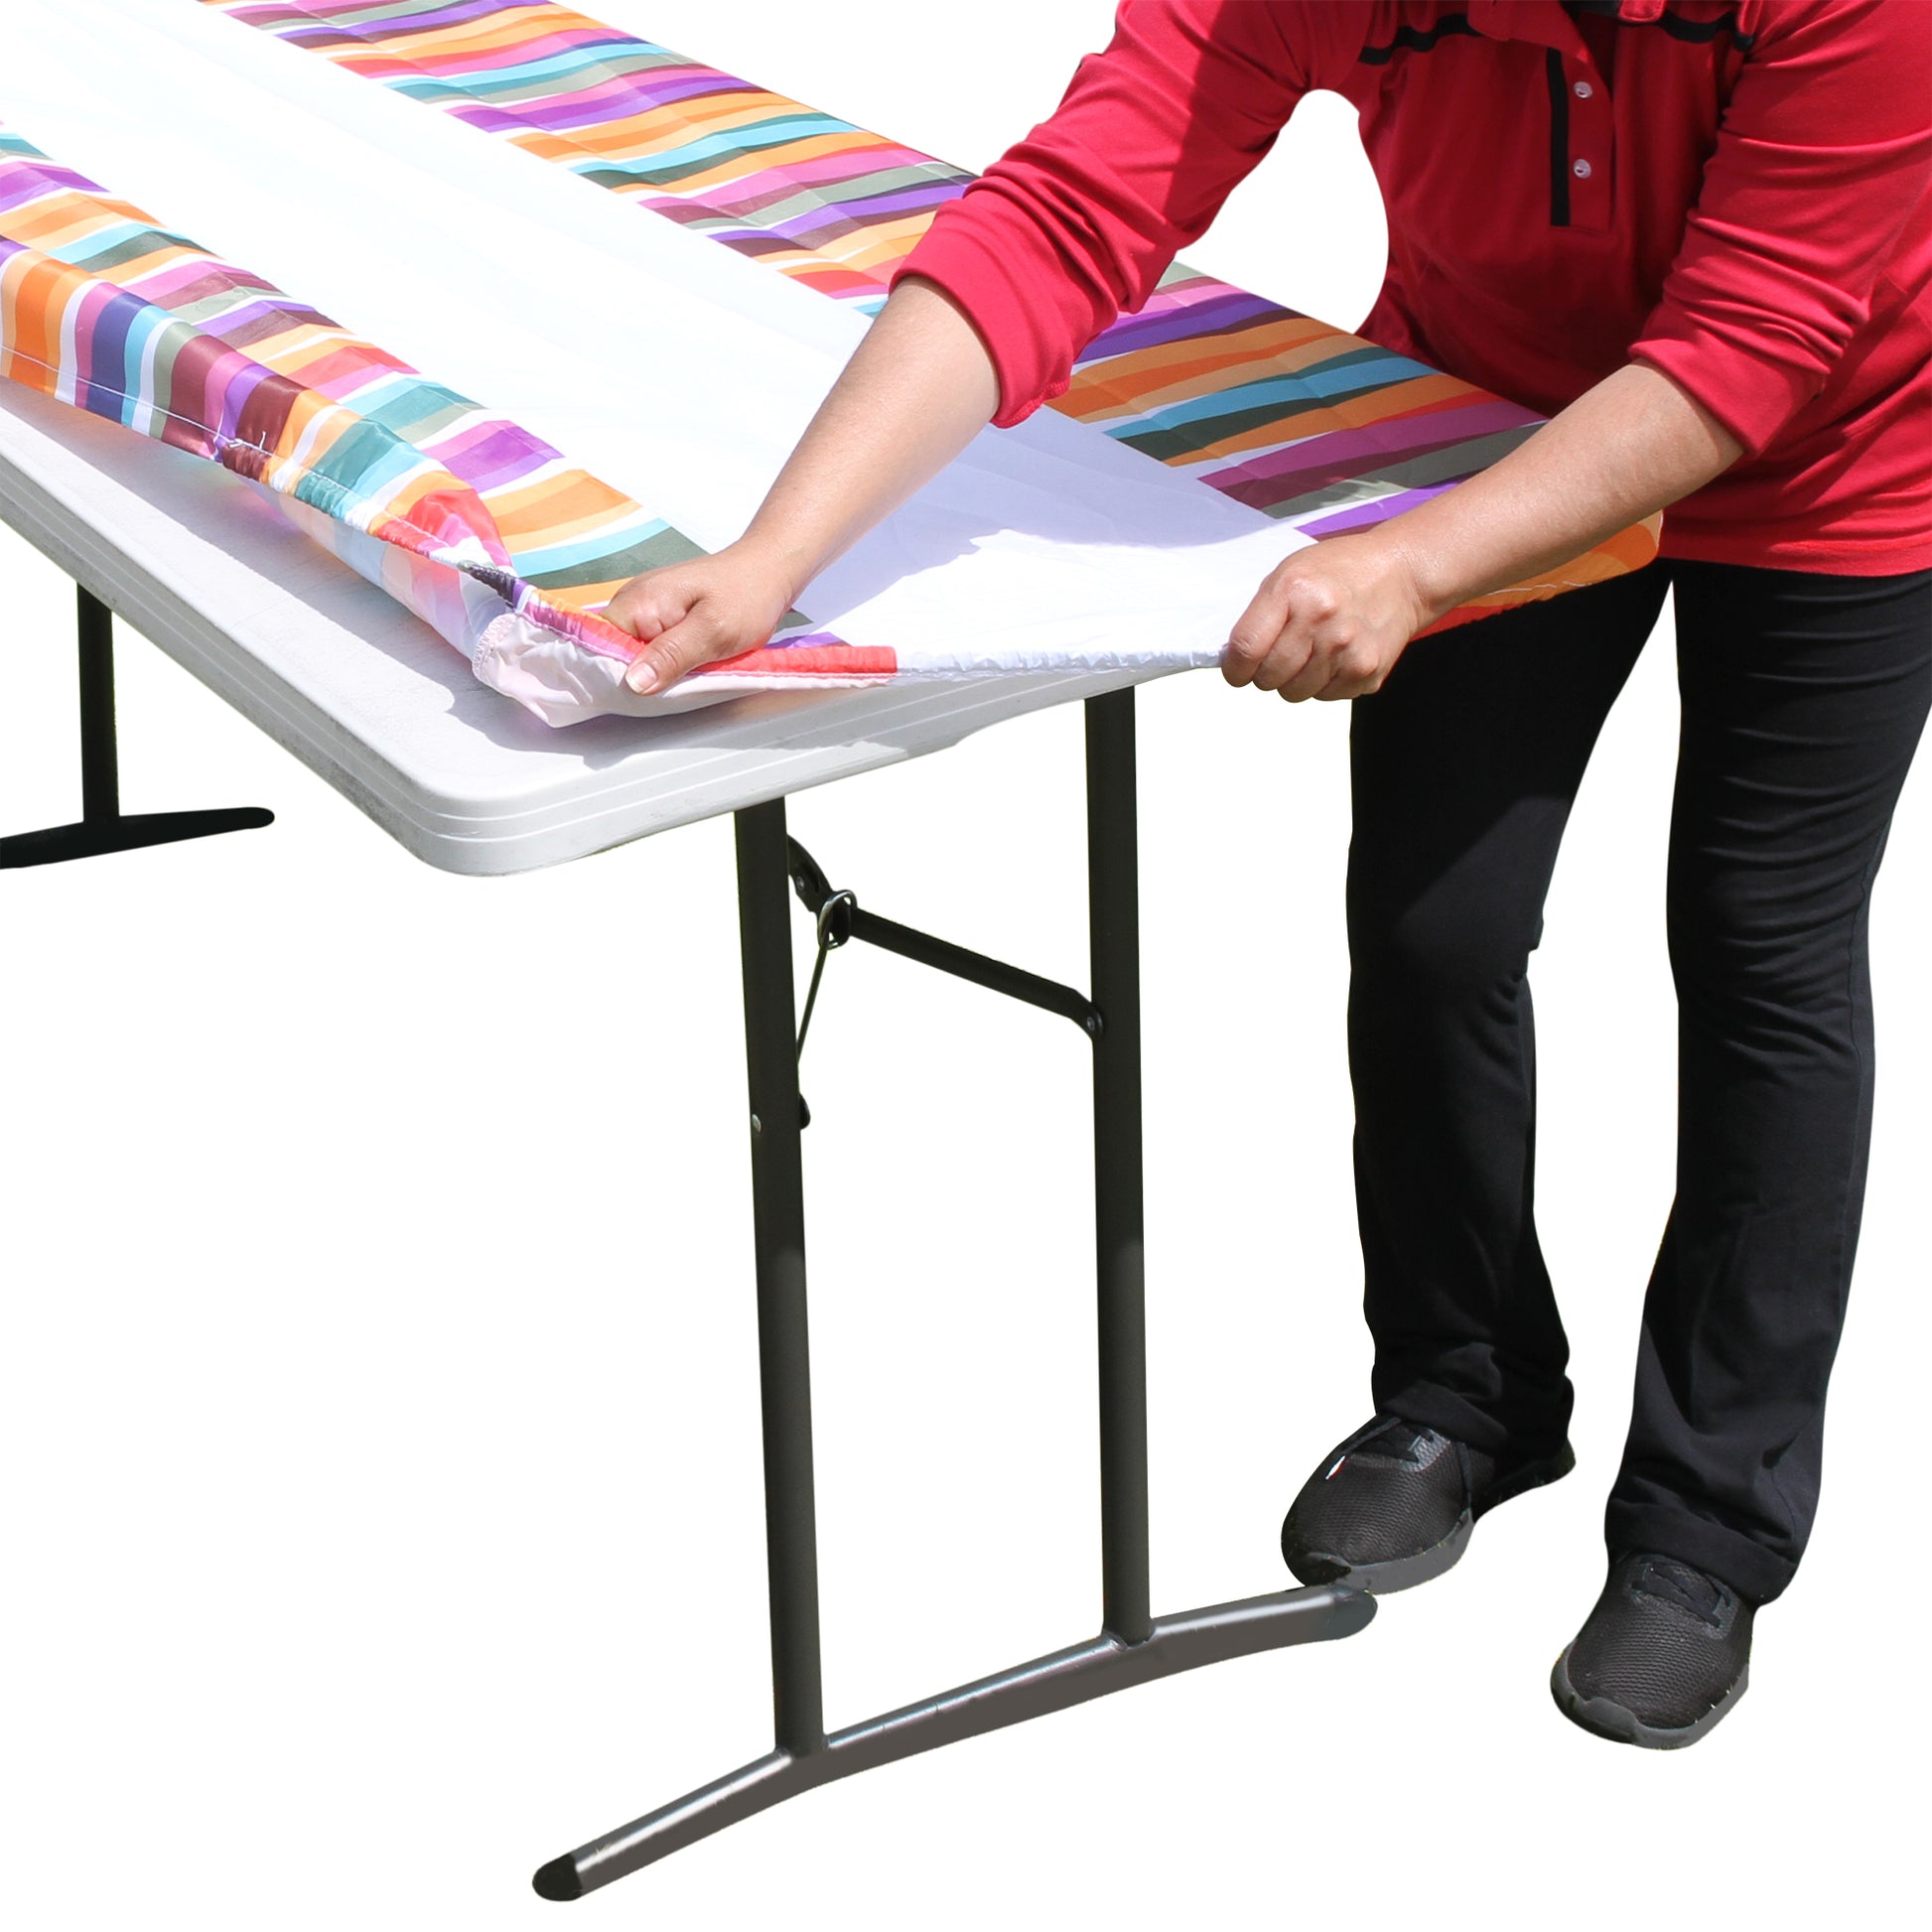 TableCloth PLUS 72" Laces Fitted Polyester Tablecloth for 6' Folding Tables is easy to clean, water proof, easy to install, and has an elastic rim